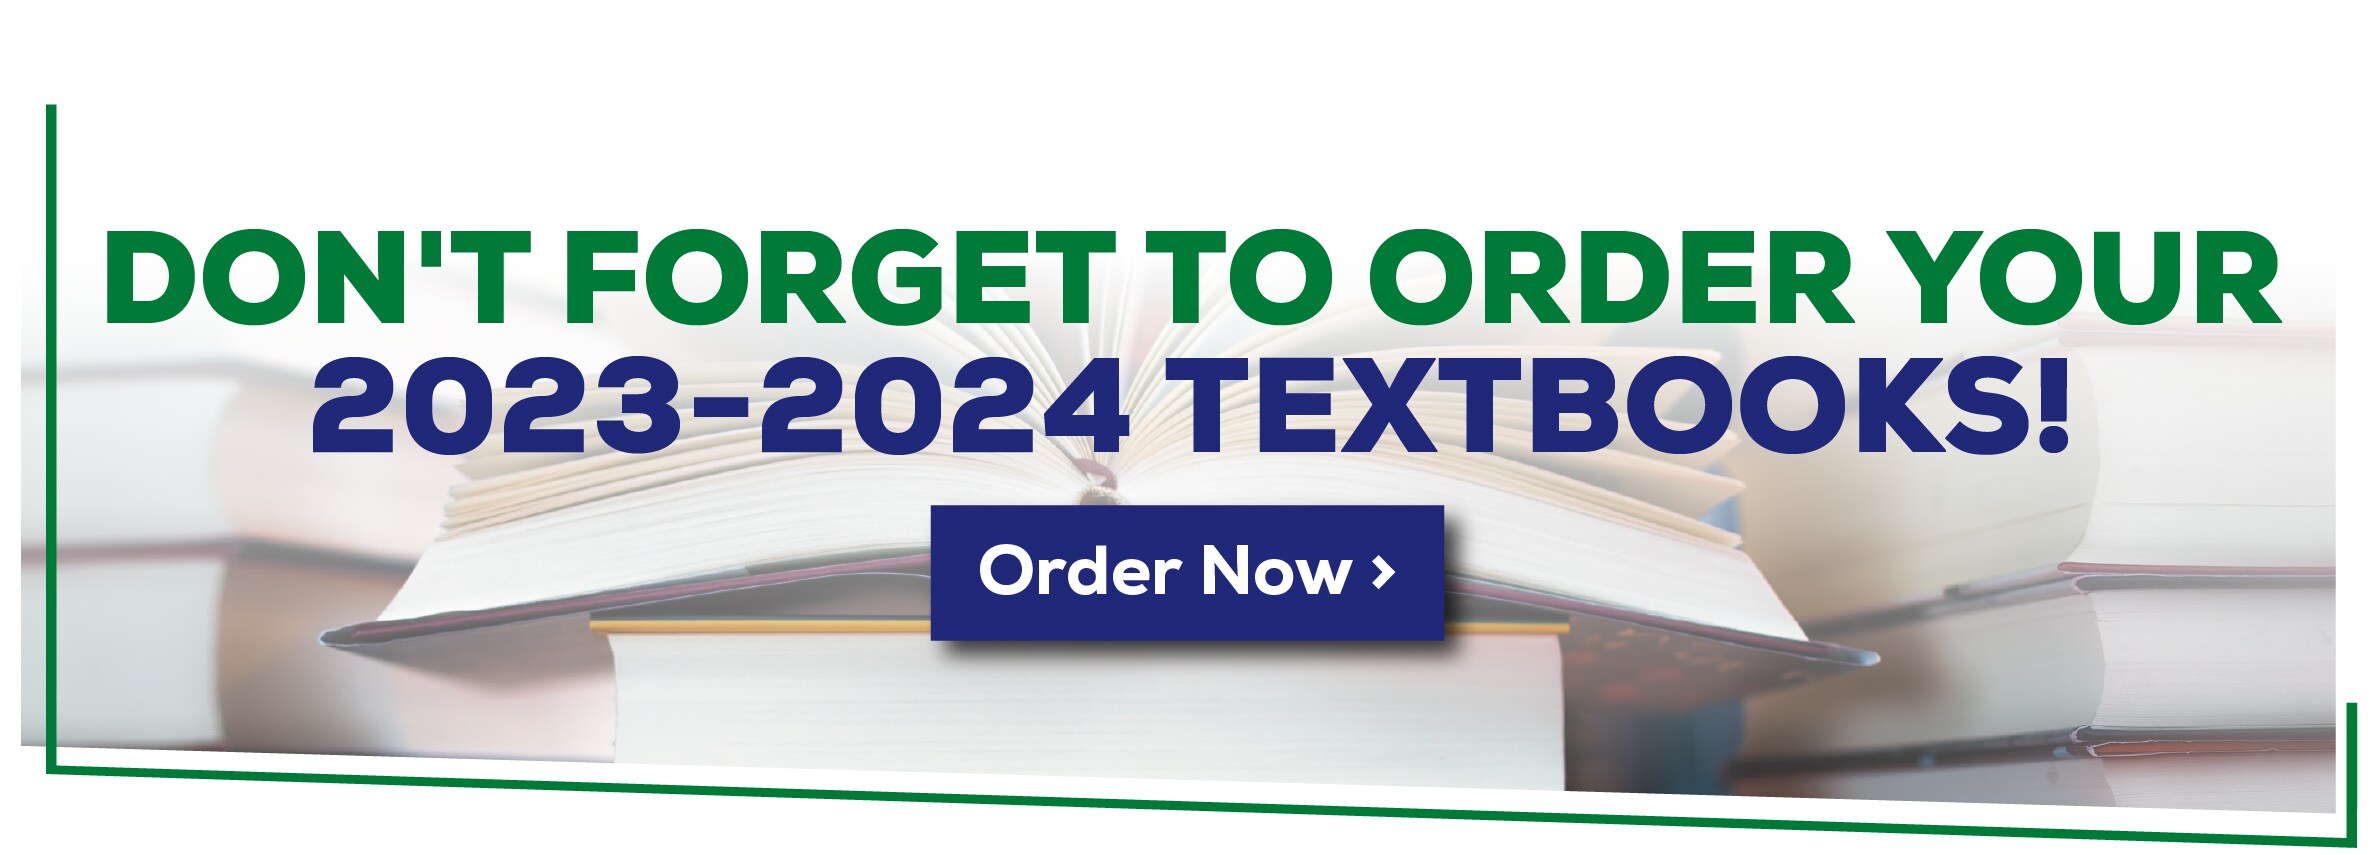 Don't forget to order your 2023-2024 textbooks! Order Now!